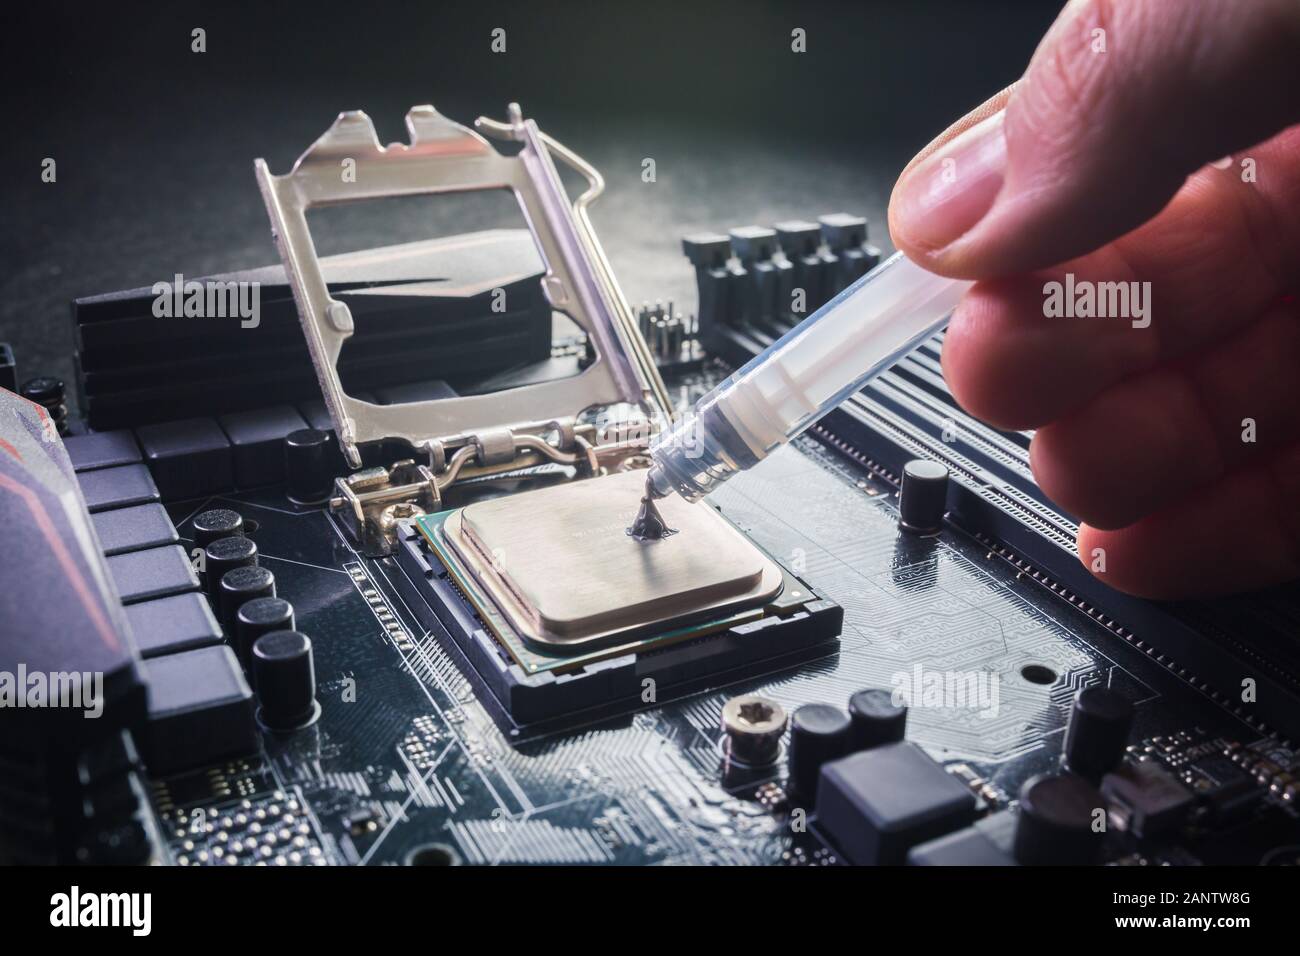 Close up to technician squeezing or application the thermal paste compound on the top of main cpu in the socket. Concept of repairing or upgrading Stock Photo